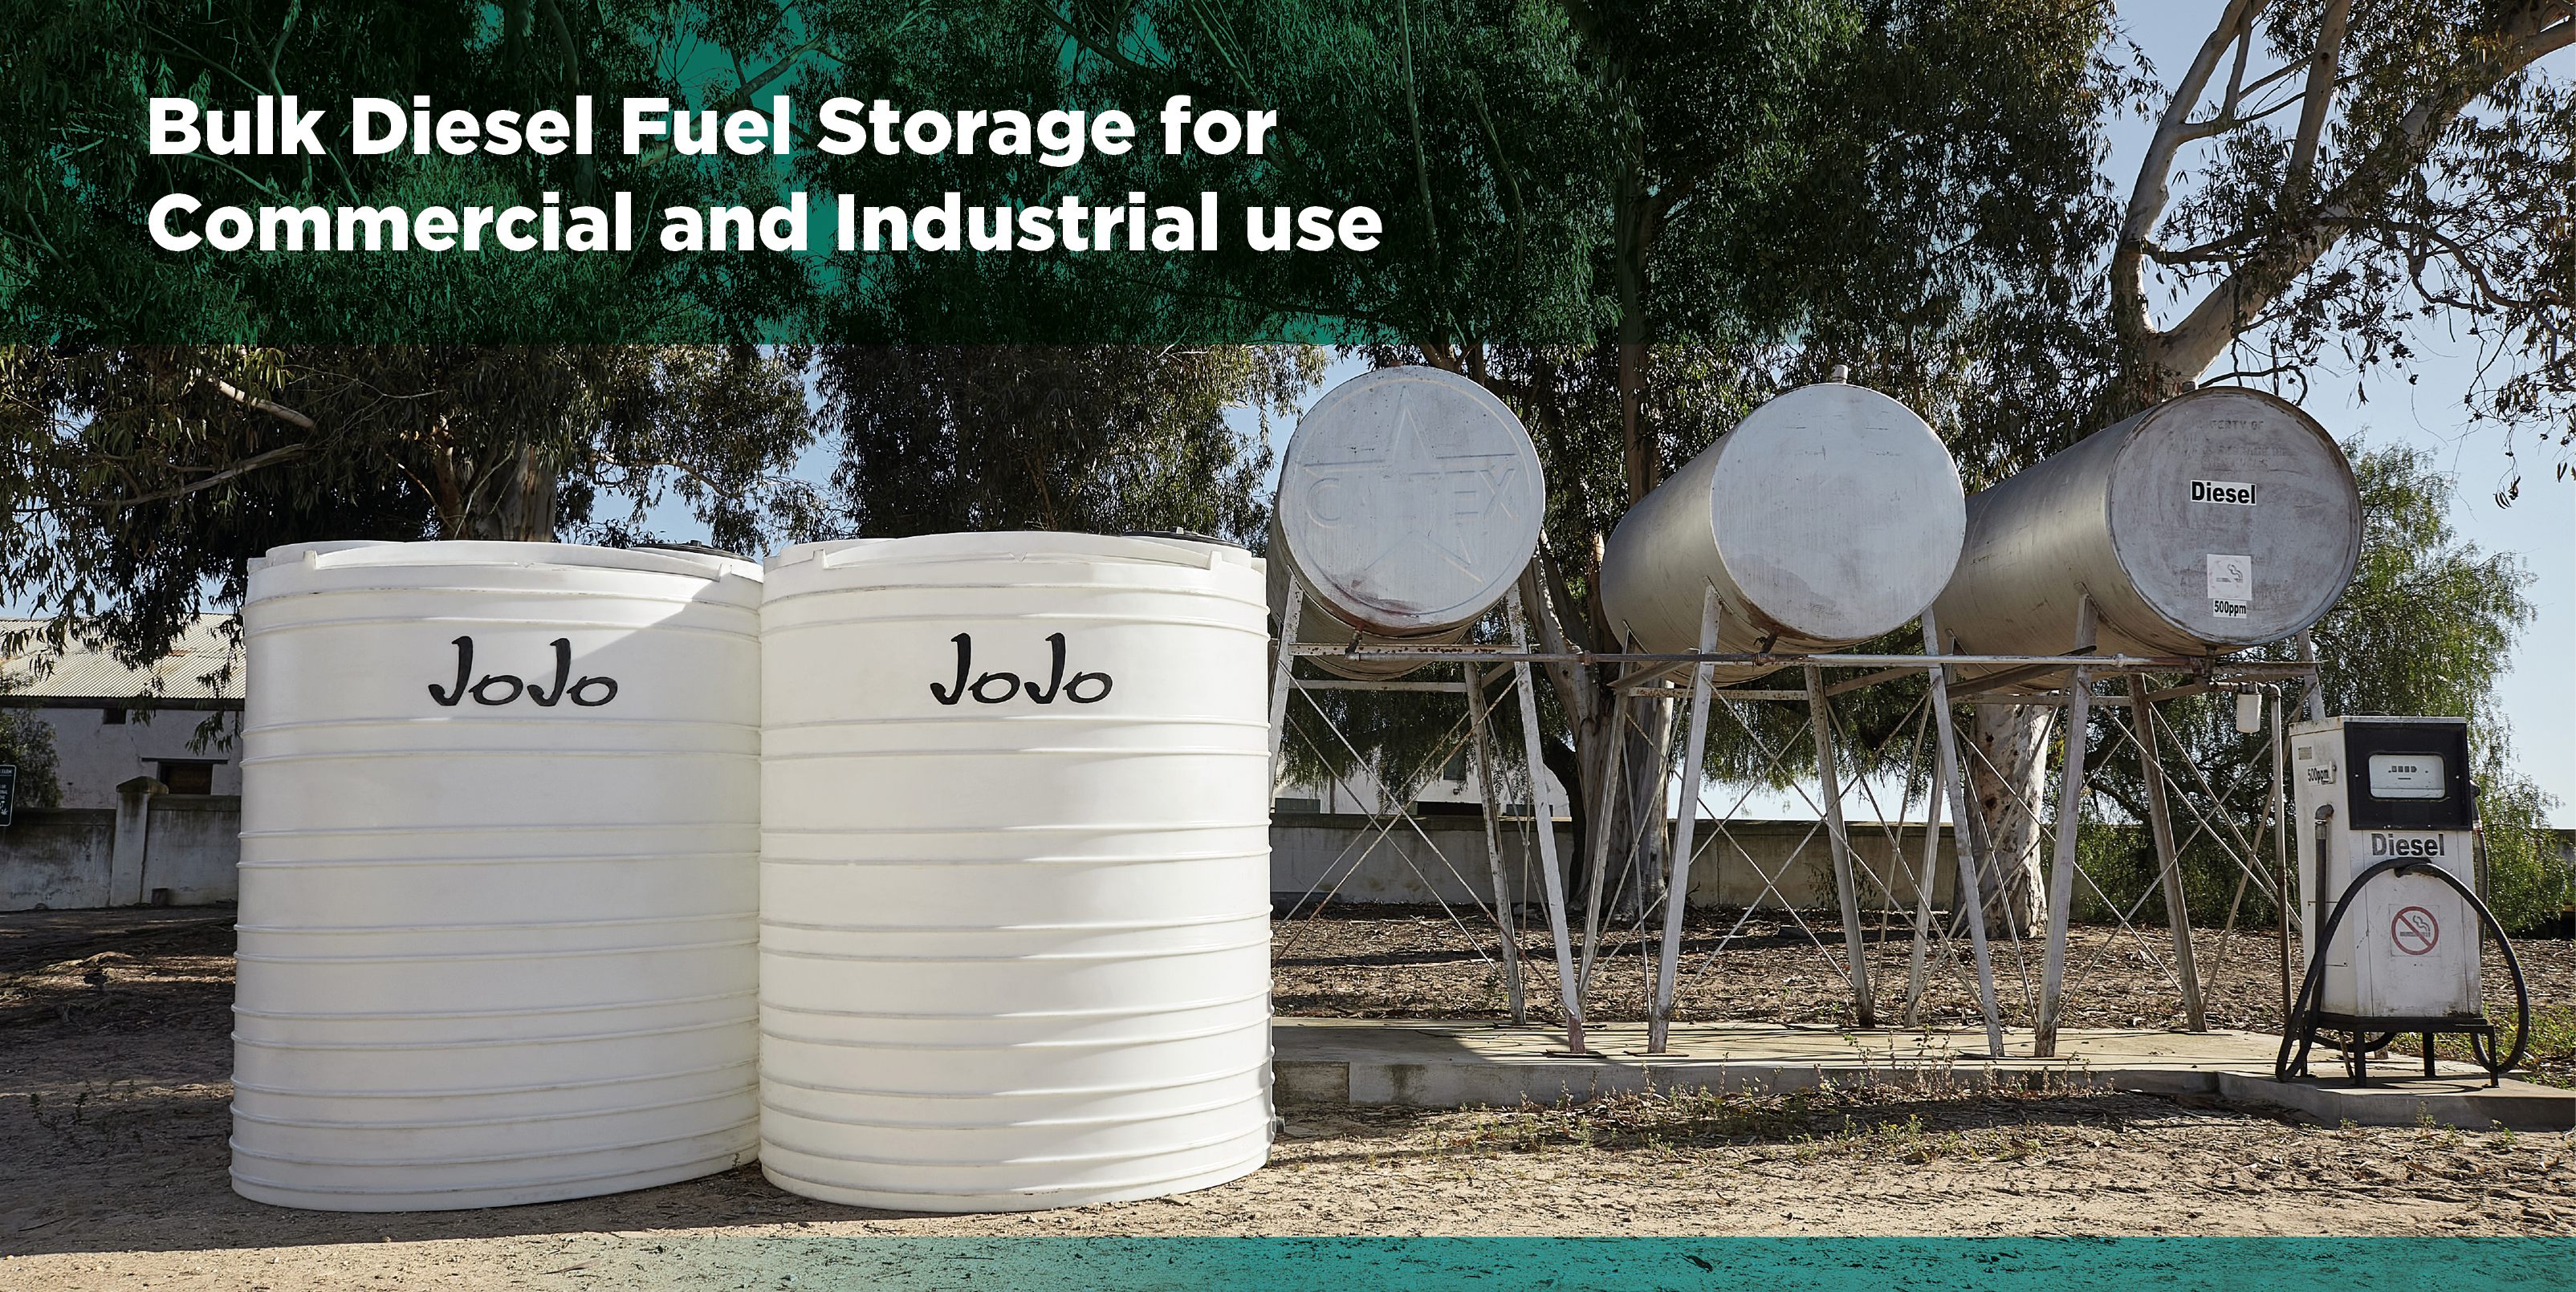 Bulk Diesel Fuel Storage for Commercial and Industrial Use - JoJo